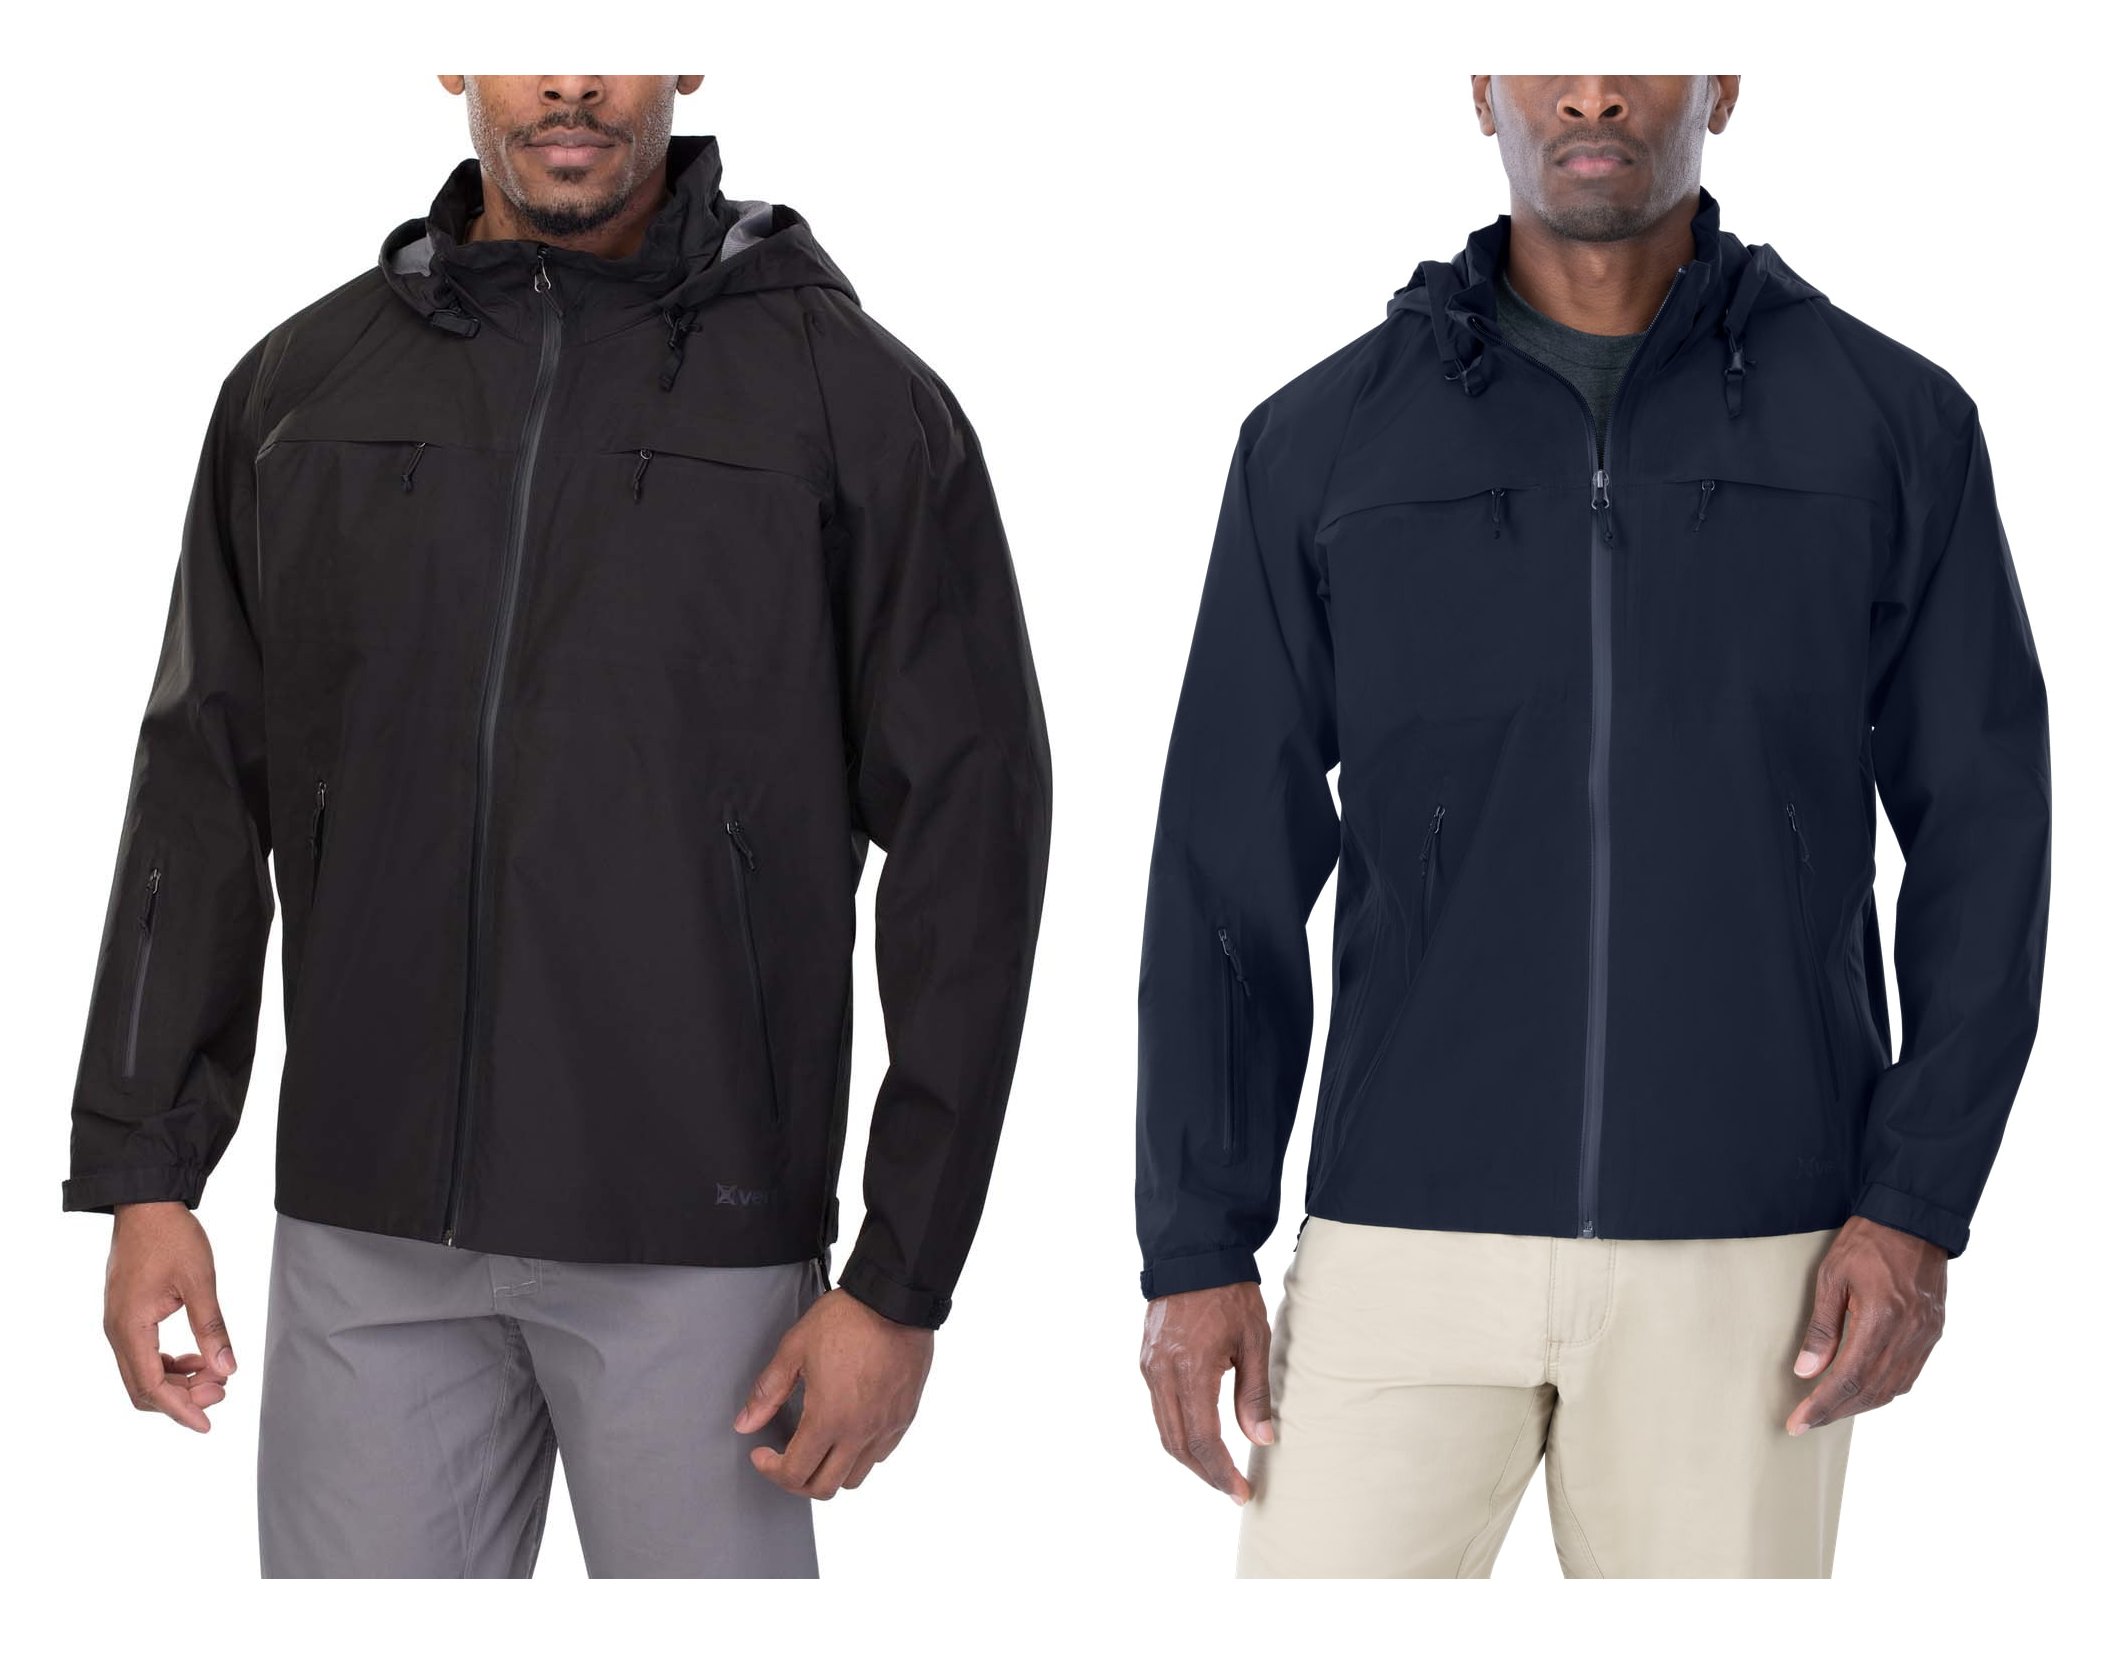 Vertx Integrity Waterproof Shell Jacket | Up to 16% Off 5 Star 